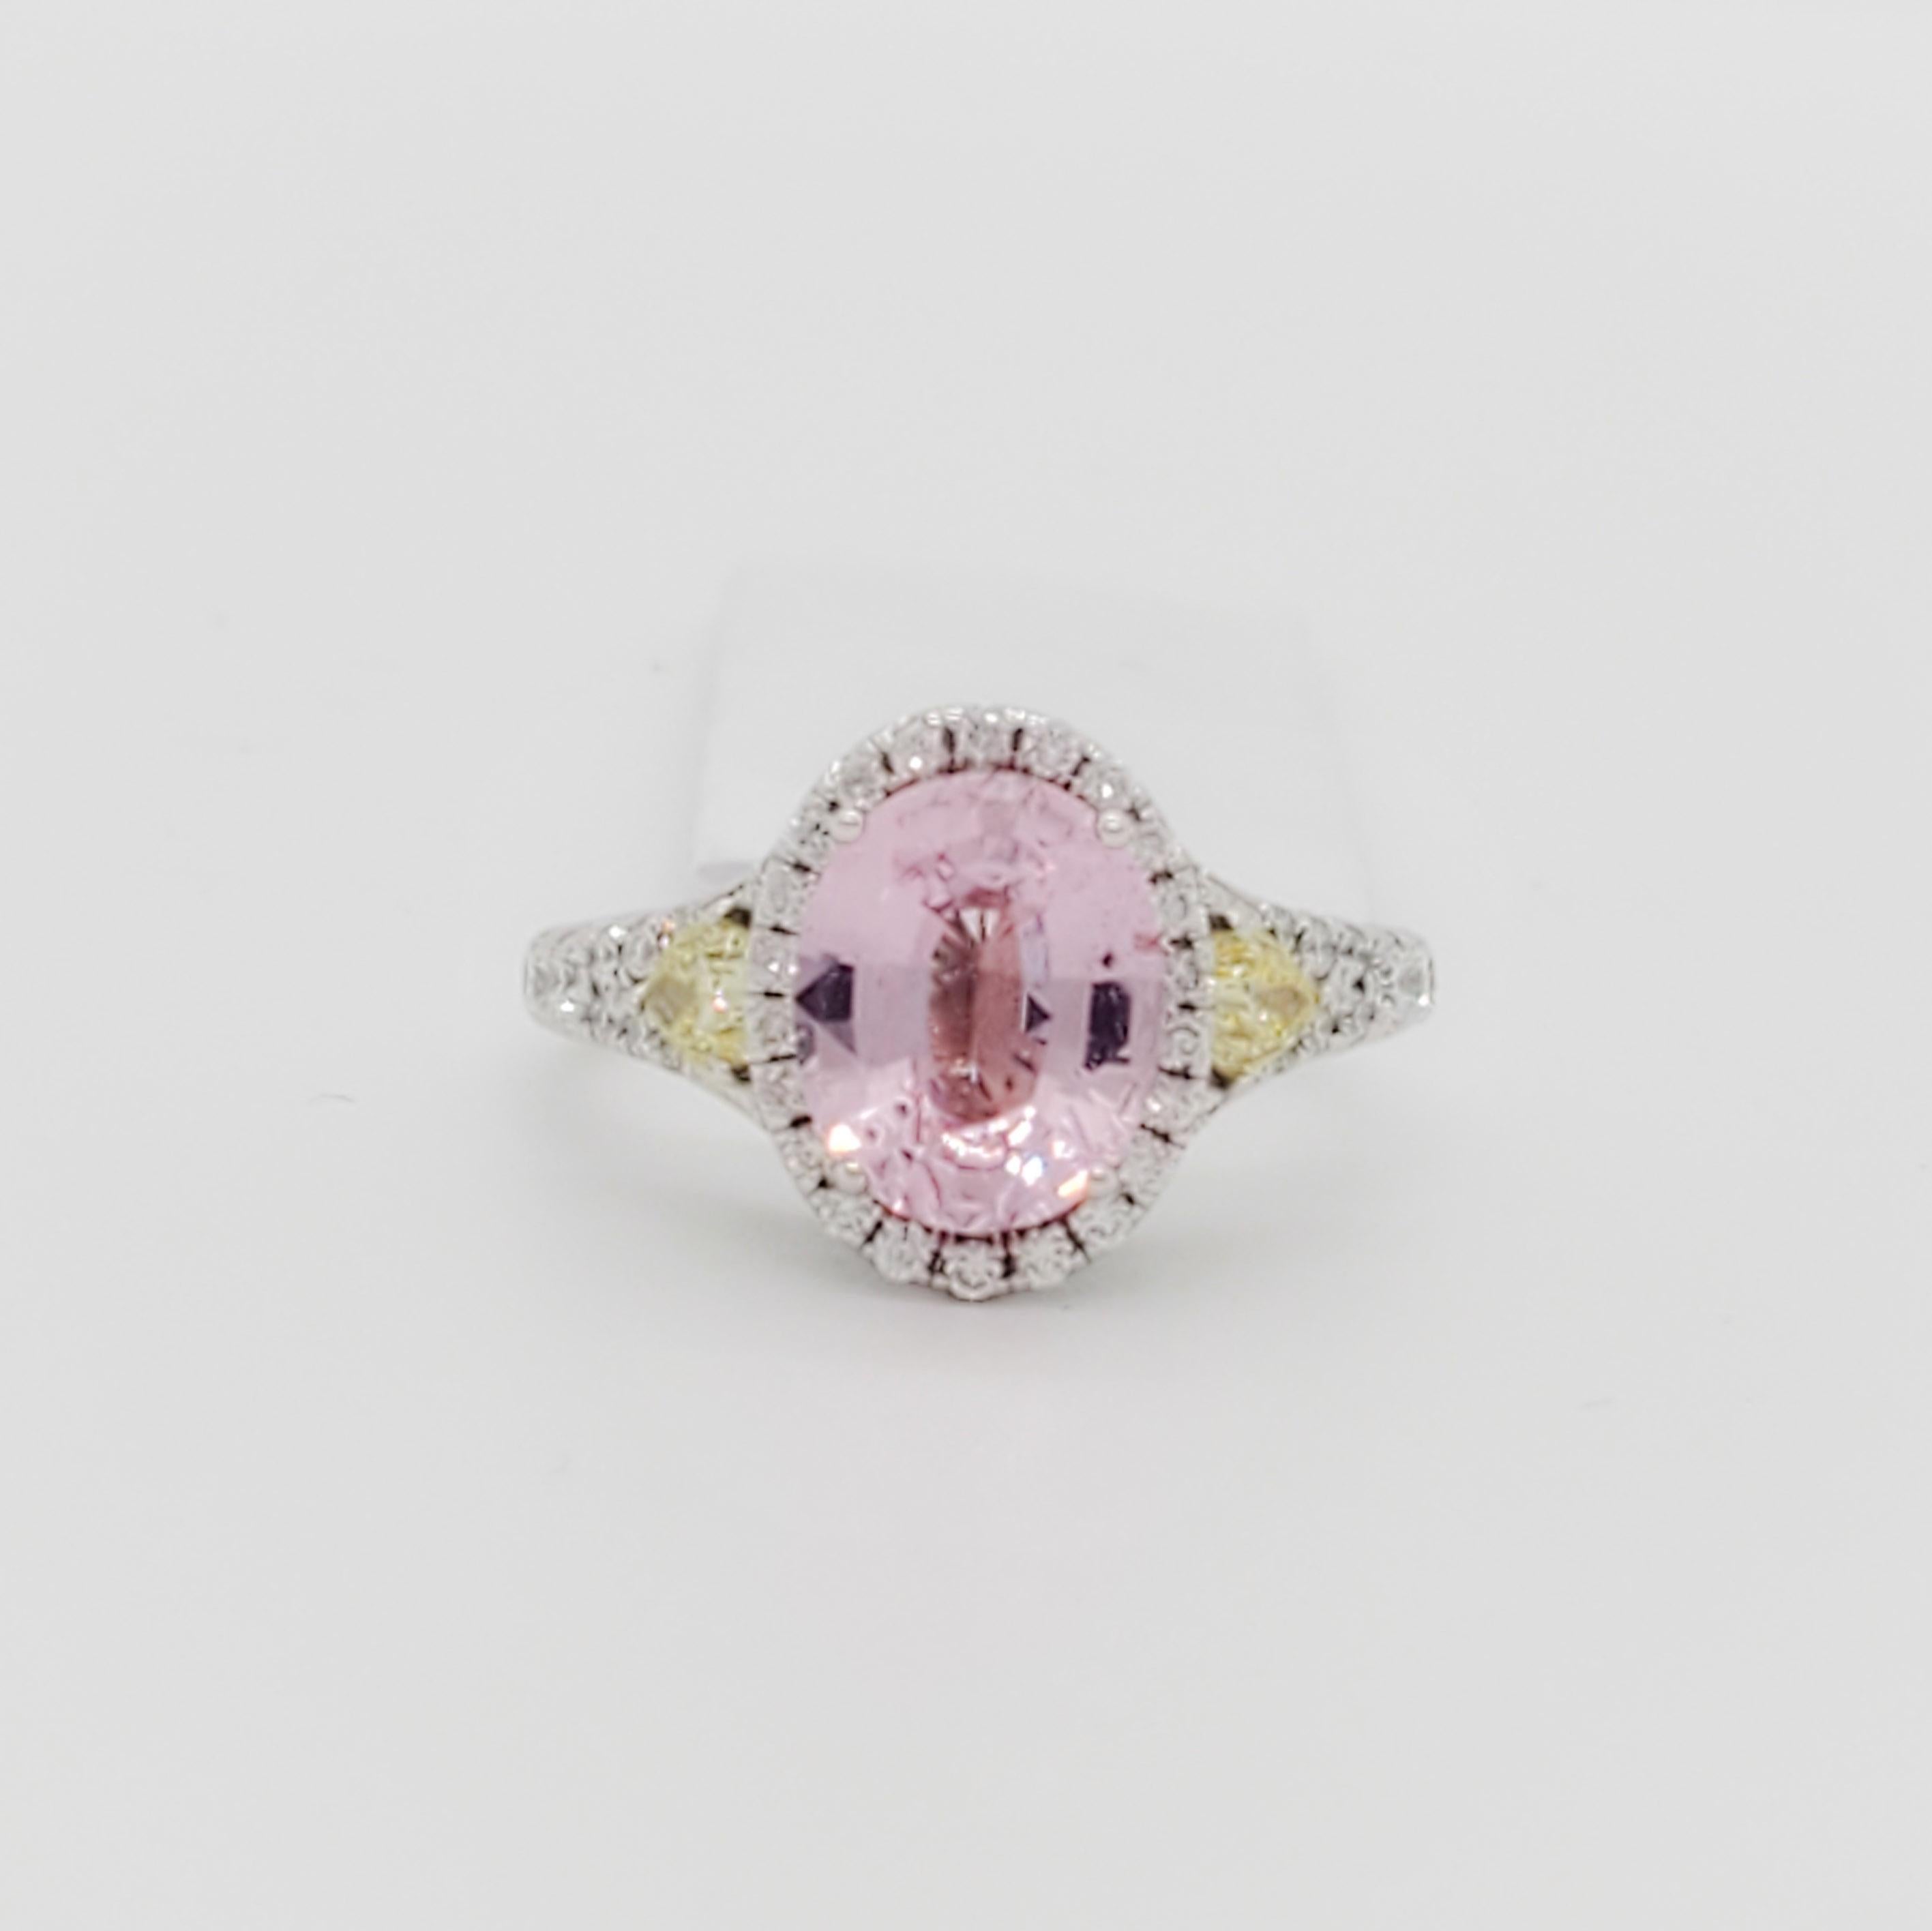 Beautiful 2.17 ct. pink sapphire oval with yellow diamond pear shapes and white diamond rounds.  Handmade in 18k white gold.  Ring size is 5.5.  GIA certificate included.